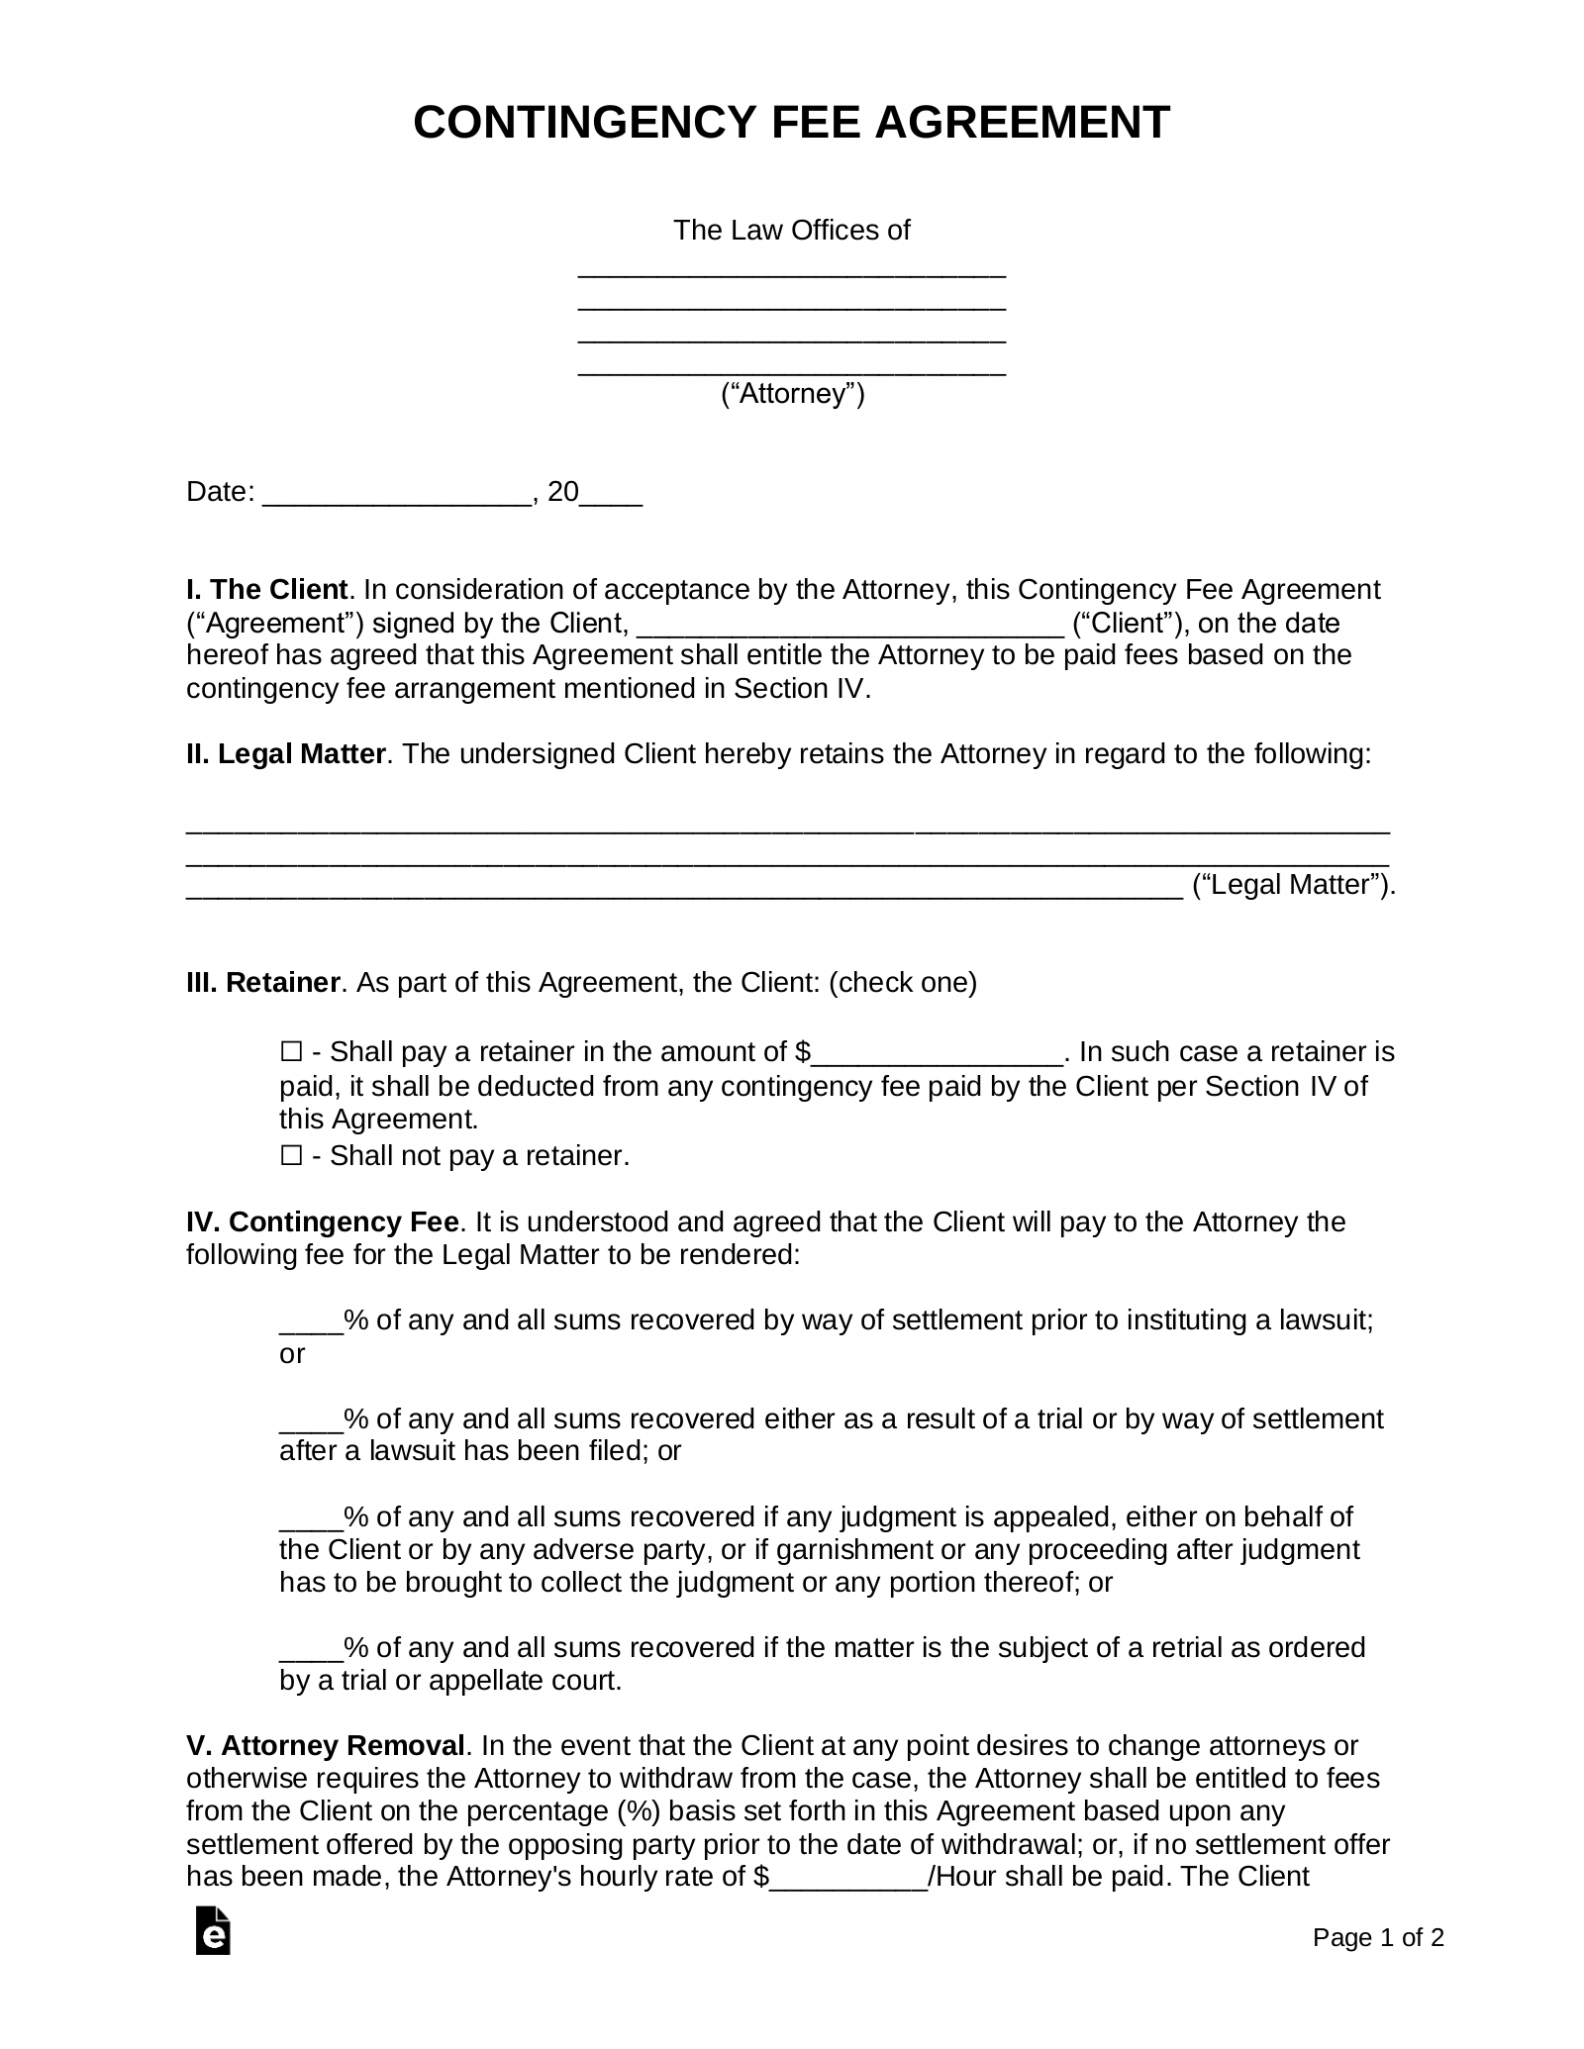 Free Contingency Fee Agreement Template - Sample - Pdf throughout Contingency Fee Agreement Template